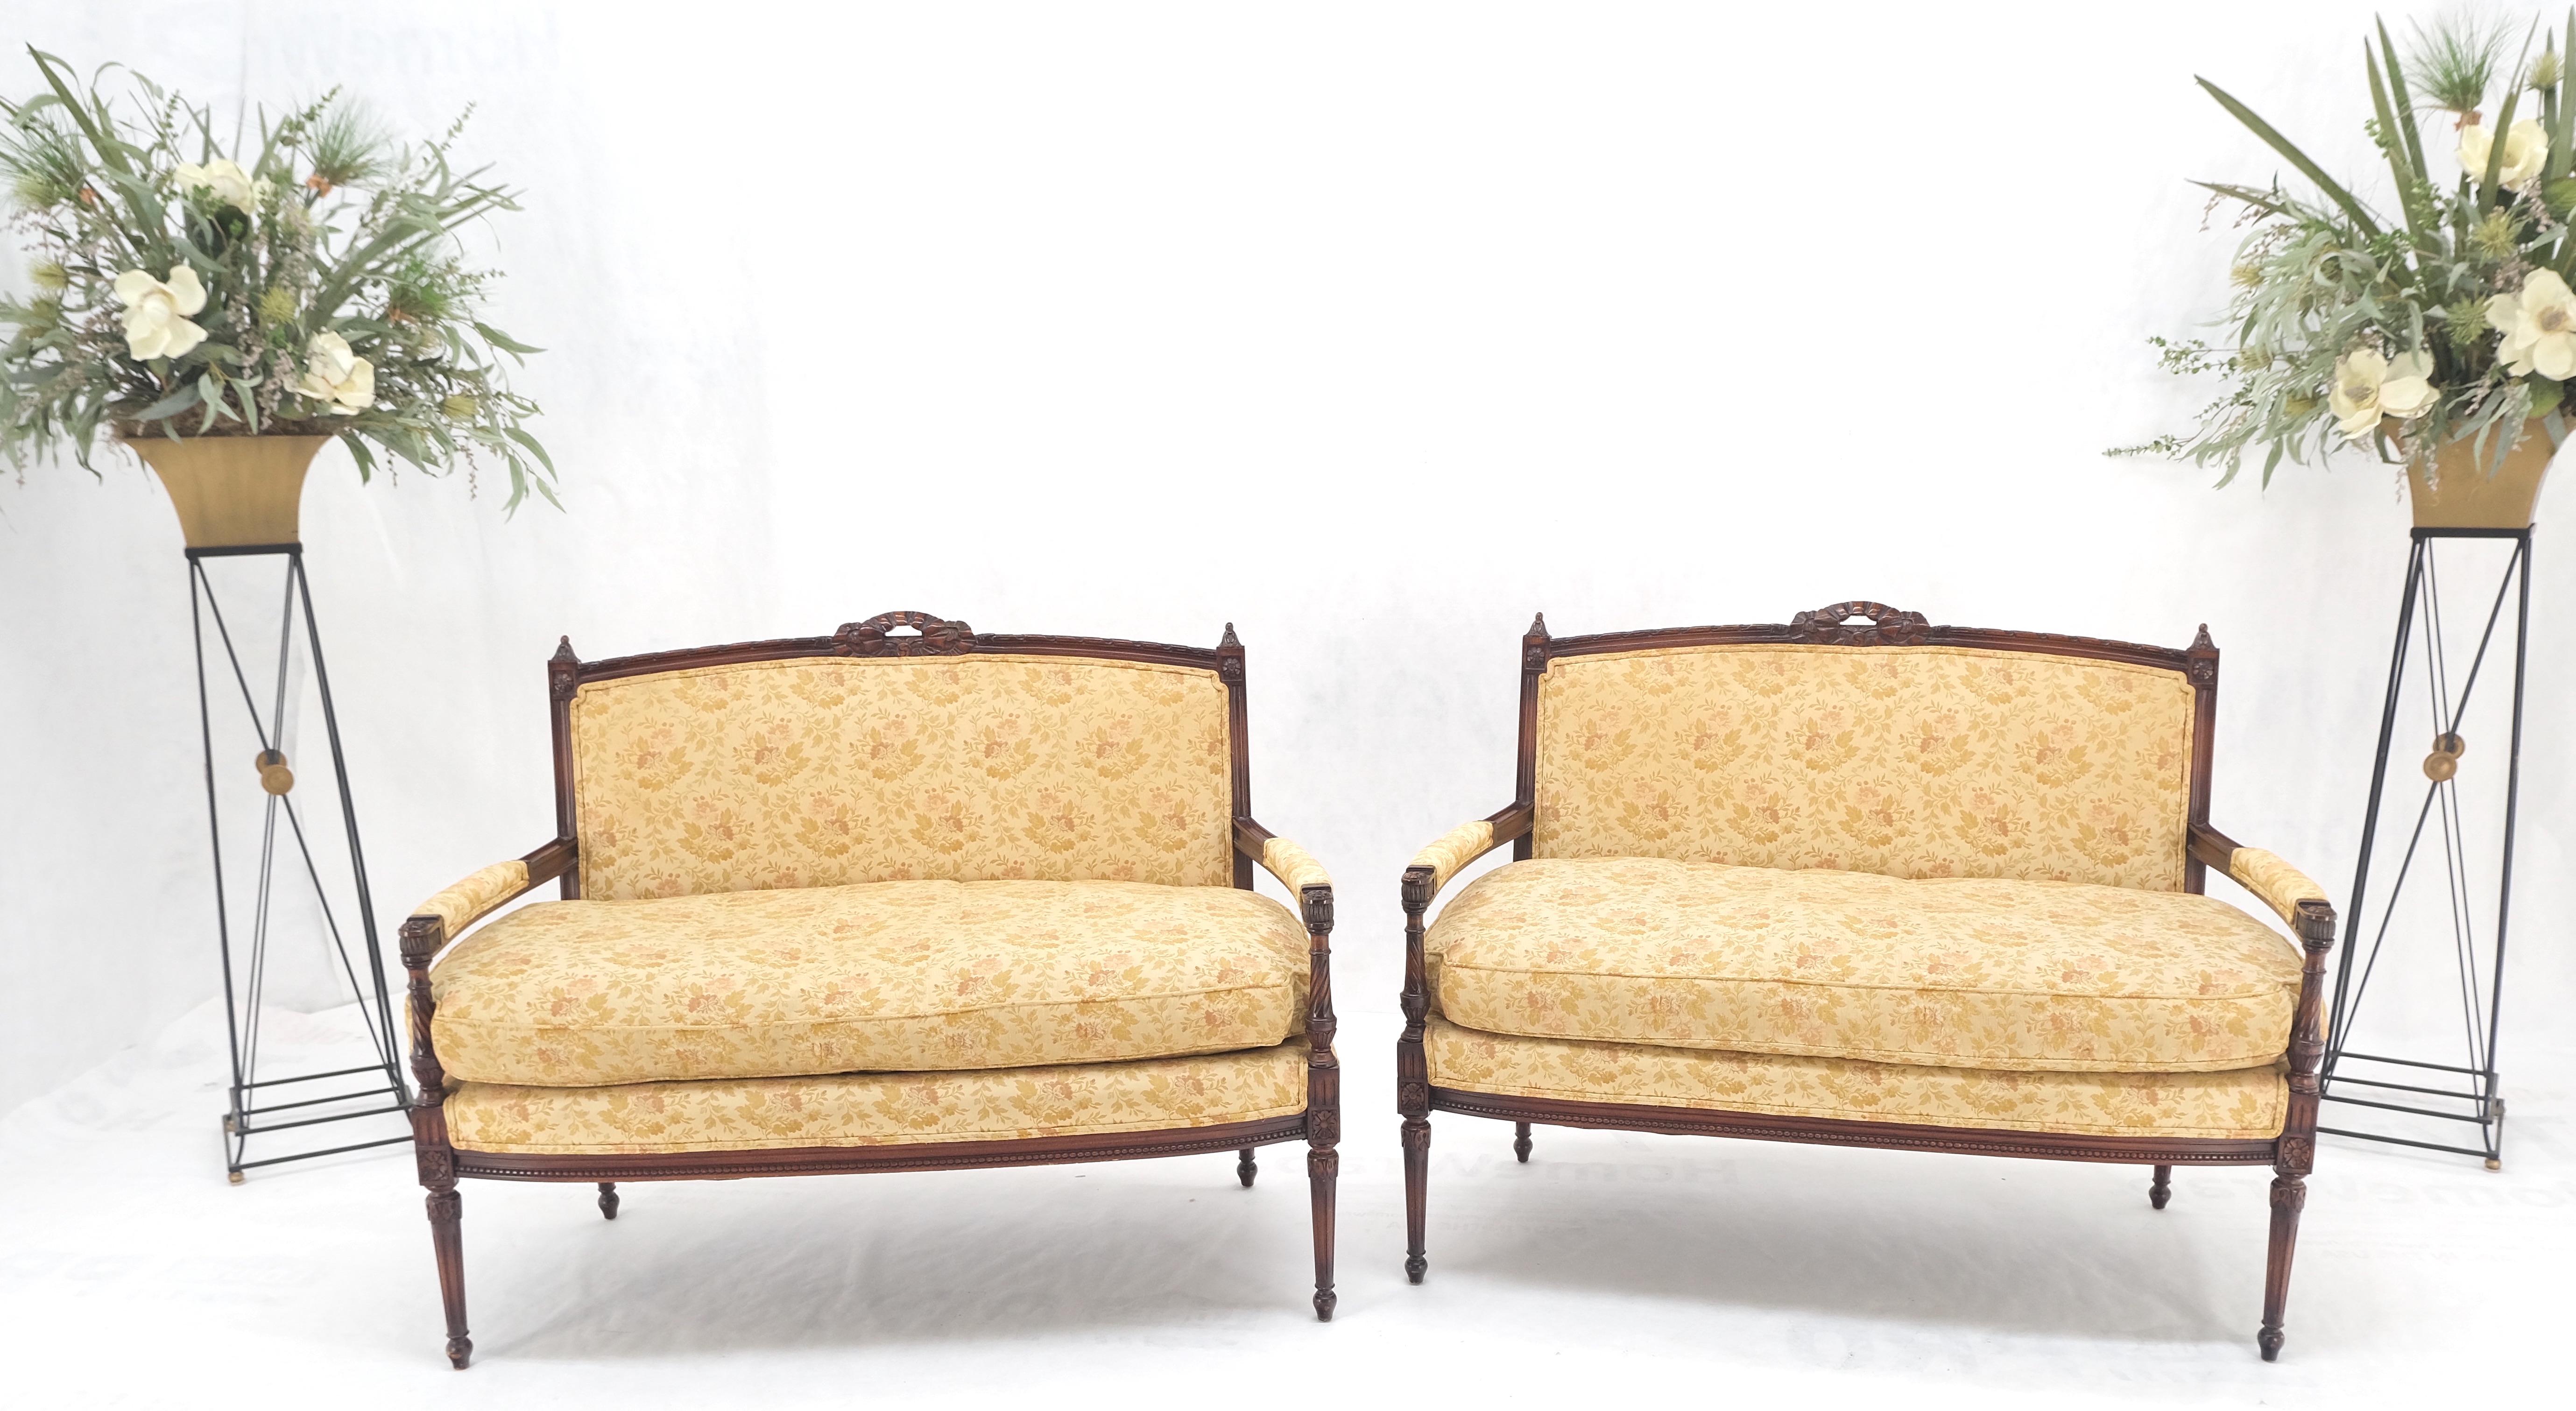 Baroque Revival Pair of Antique Quality Carved Walnut & Gold Upholstery Sofas Love Seats MINT! For Sale